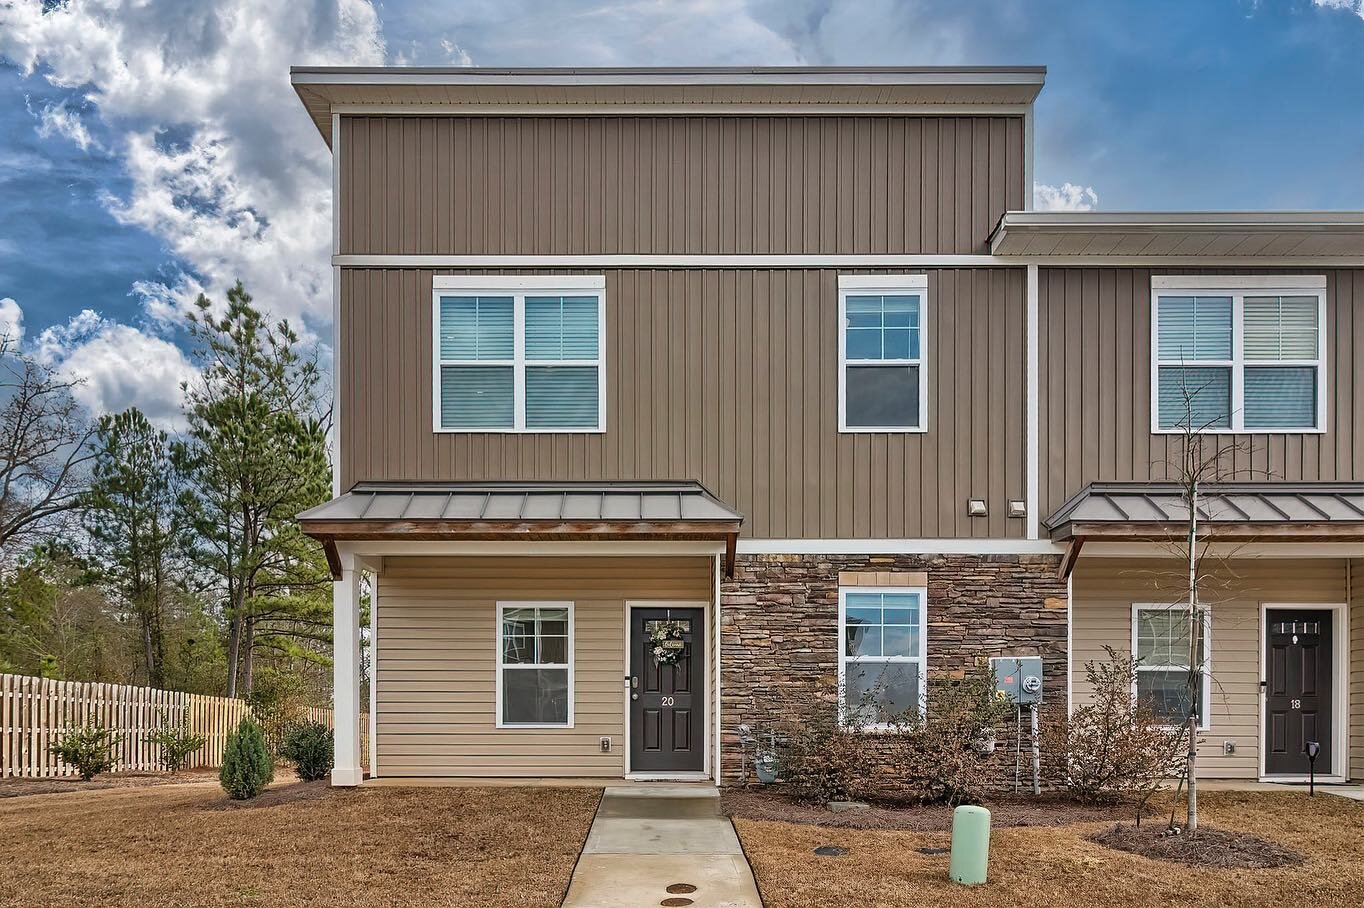 Welcome to Harbison Grove, a newer development that has beautiful townhomes throughout. This unit is only one of three that has the primary bedroom on the main level! Meticulously maintained, this townhome is one of a kind. With assigned parking dire